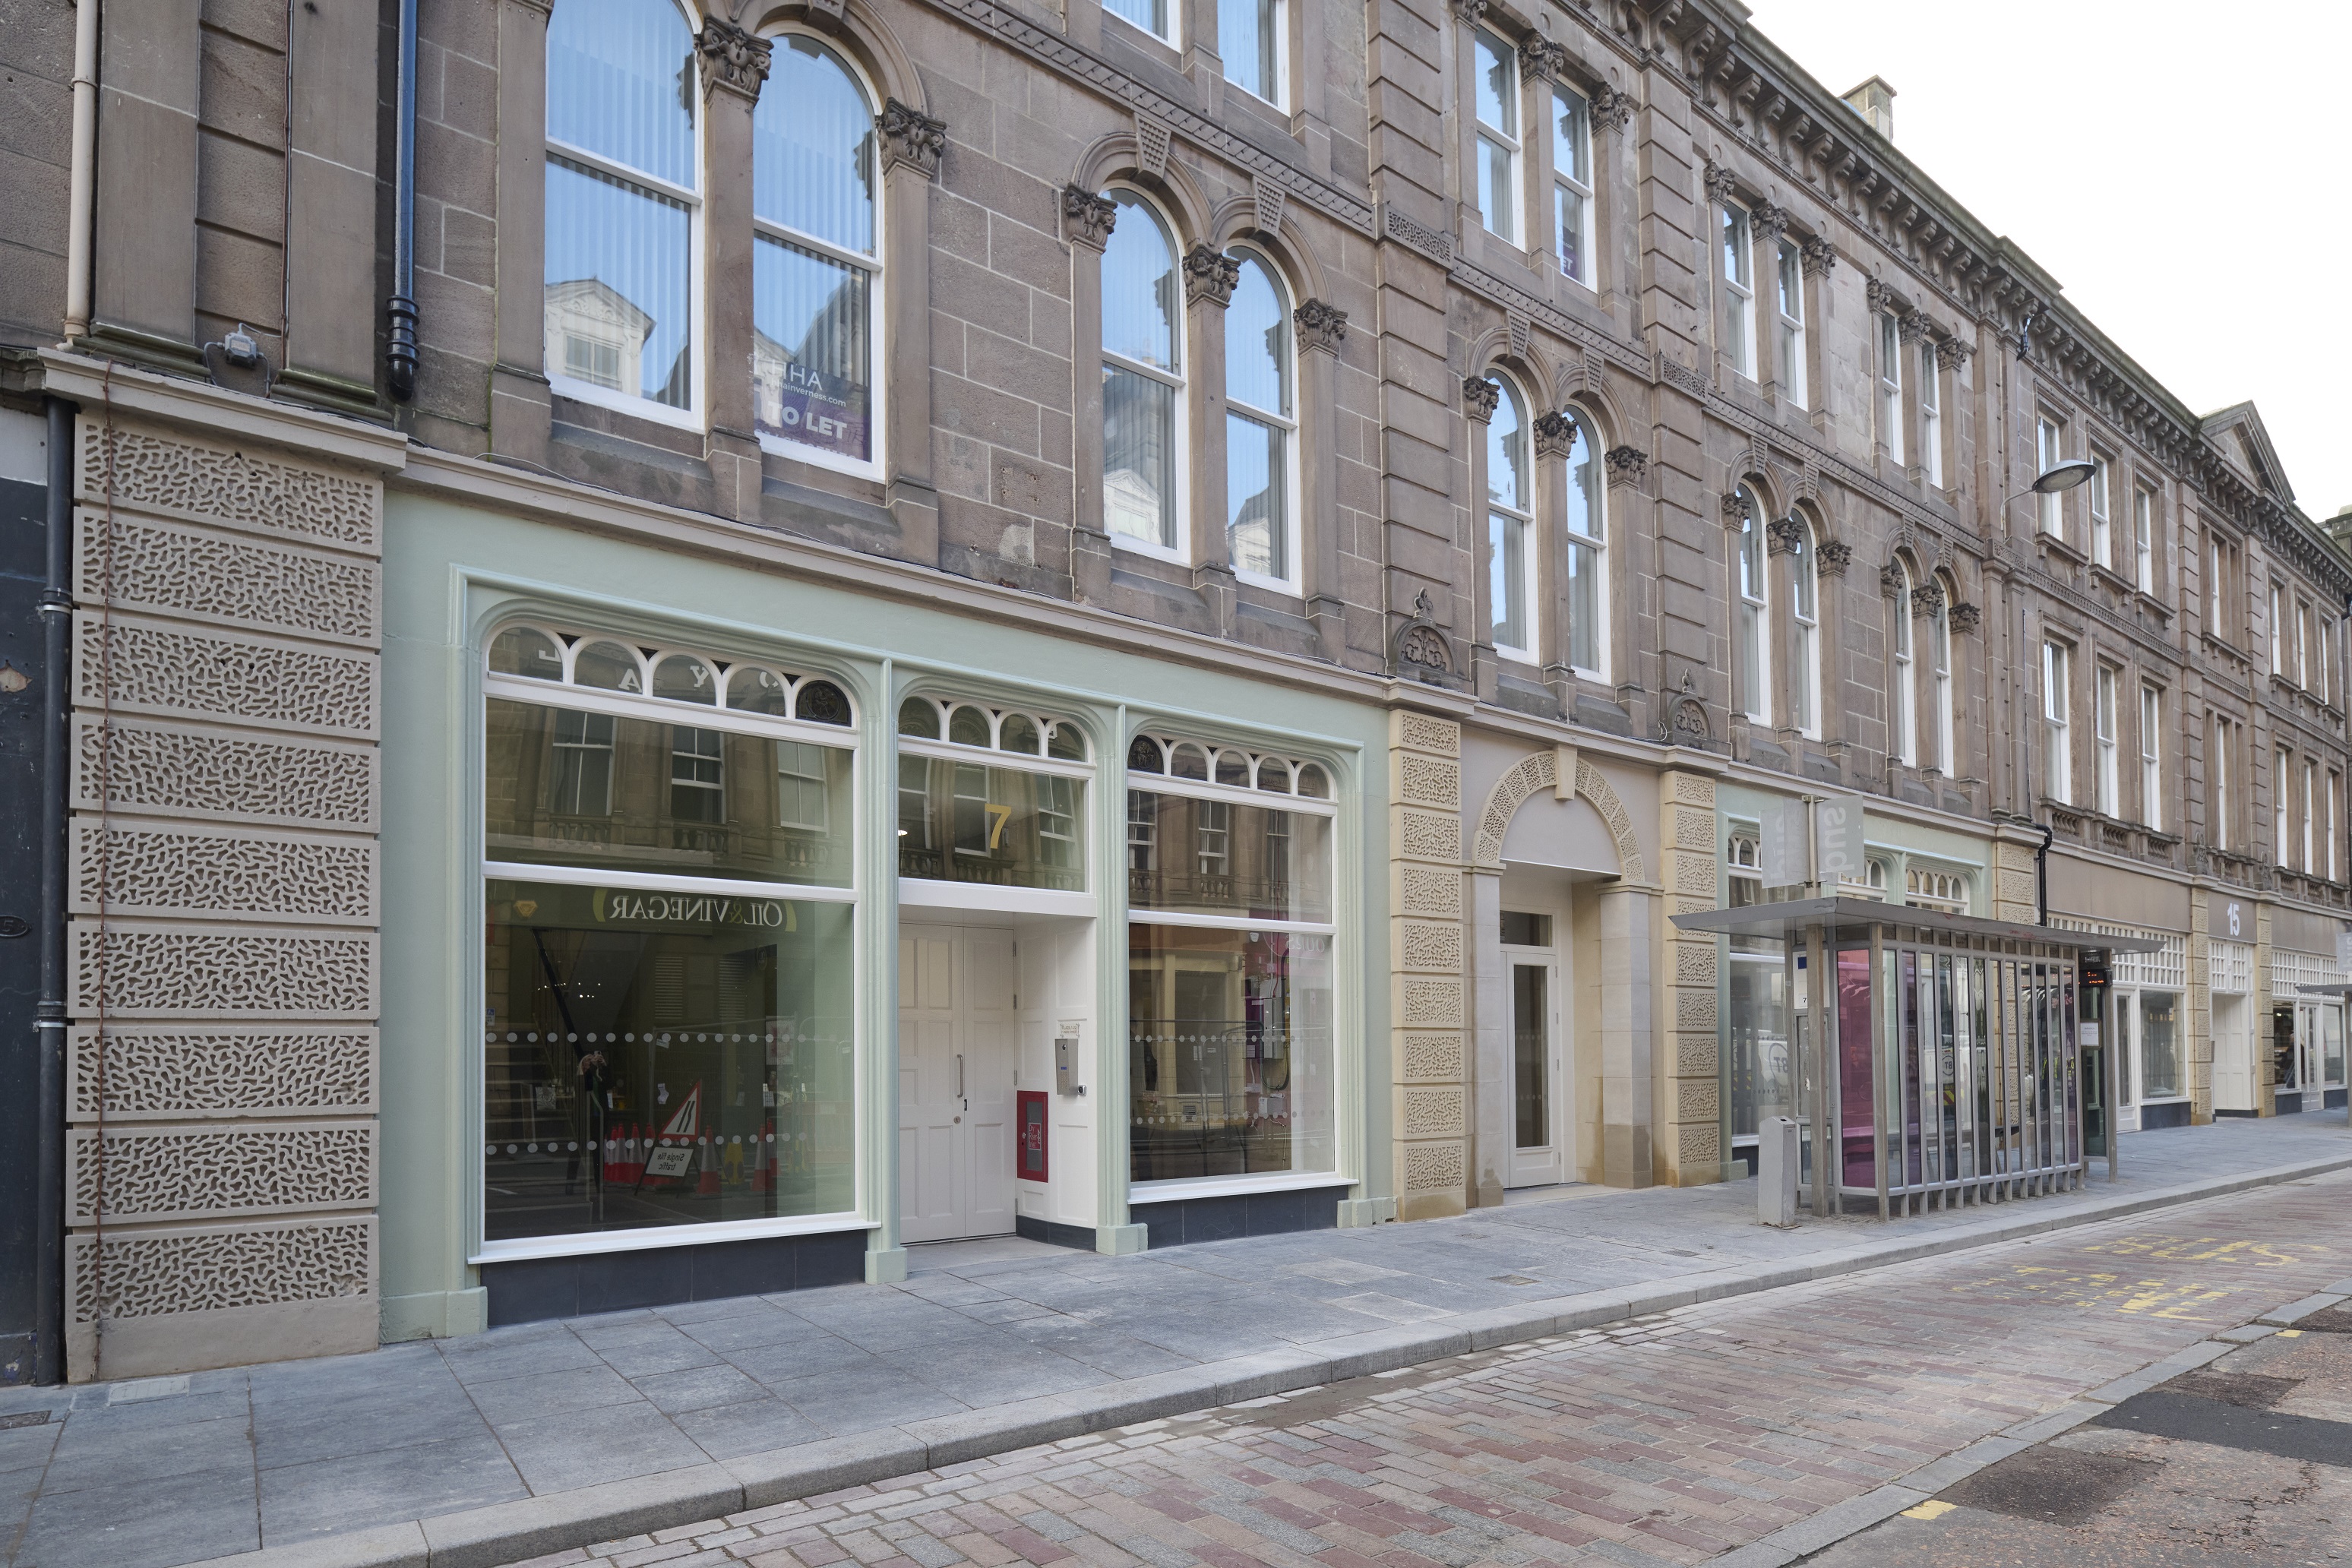 Iconic Inverness building restored to create much-needed homes for rent